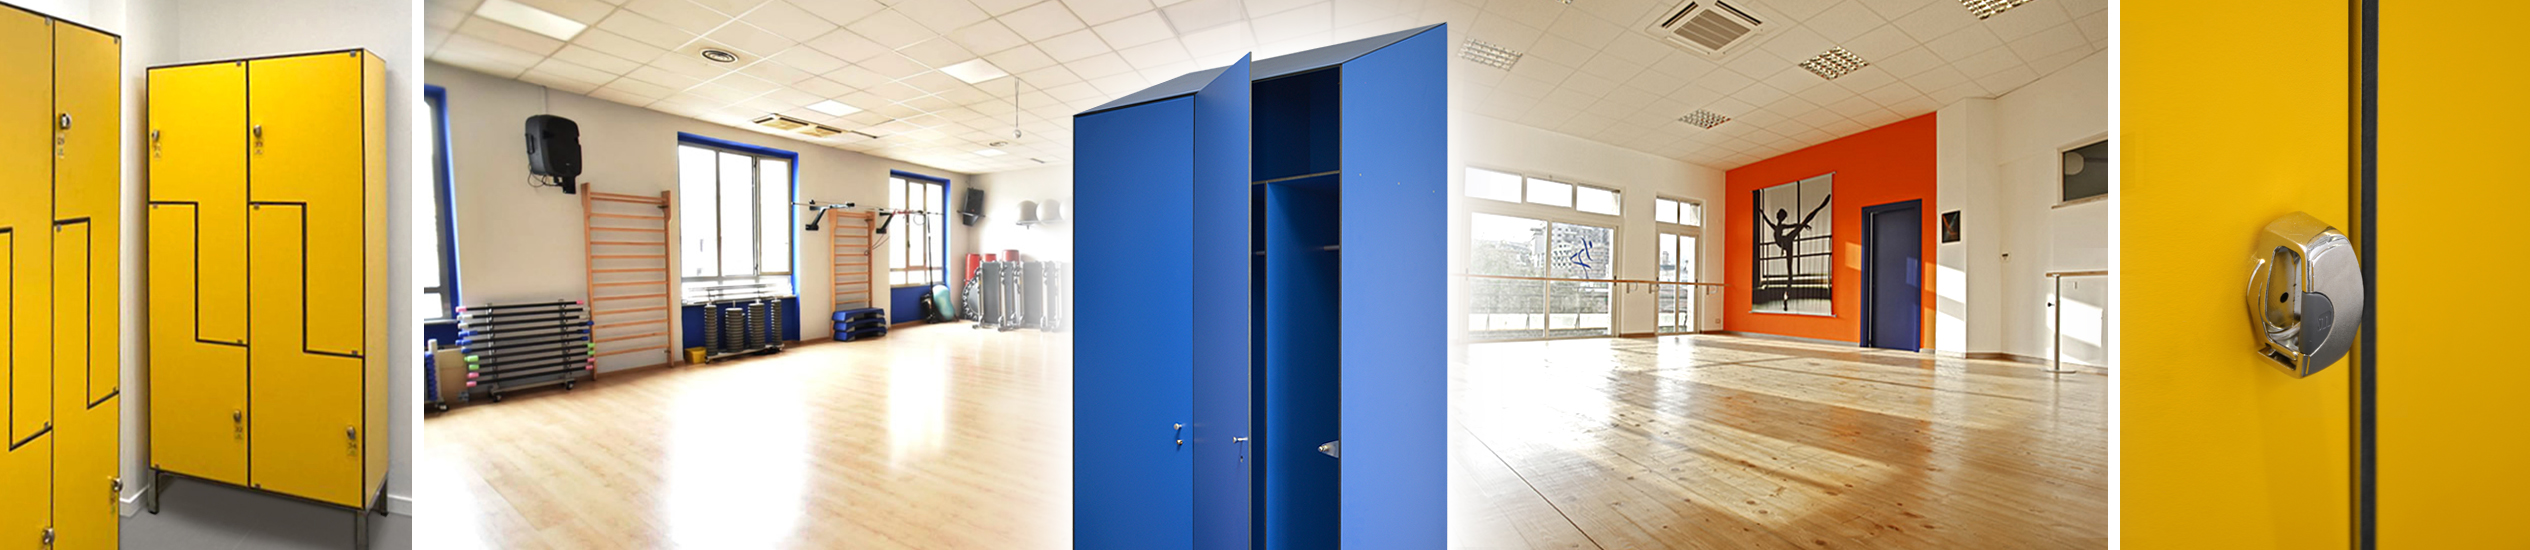 Smart Locker and minimal HPL lockers for parcel collecting points, changing rooms, gyms, hospitals, schools, large-scale distribution.